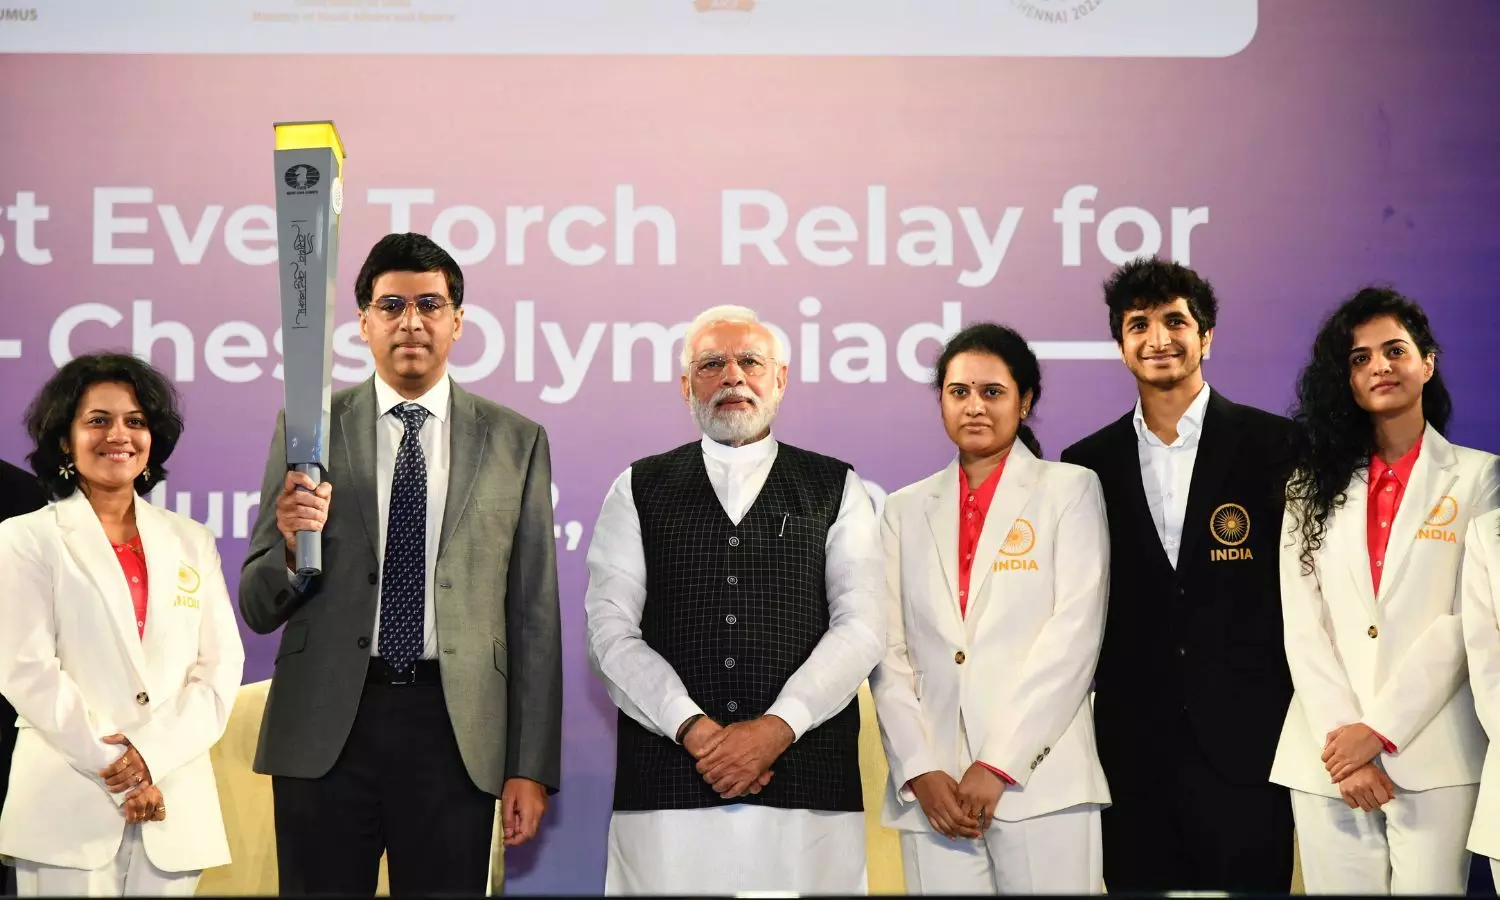 /2022/07/30811-modi-viswanathan-anand-chess-olympiad-torch-relay.webp